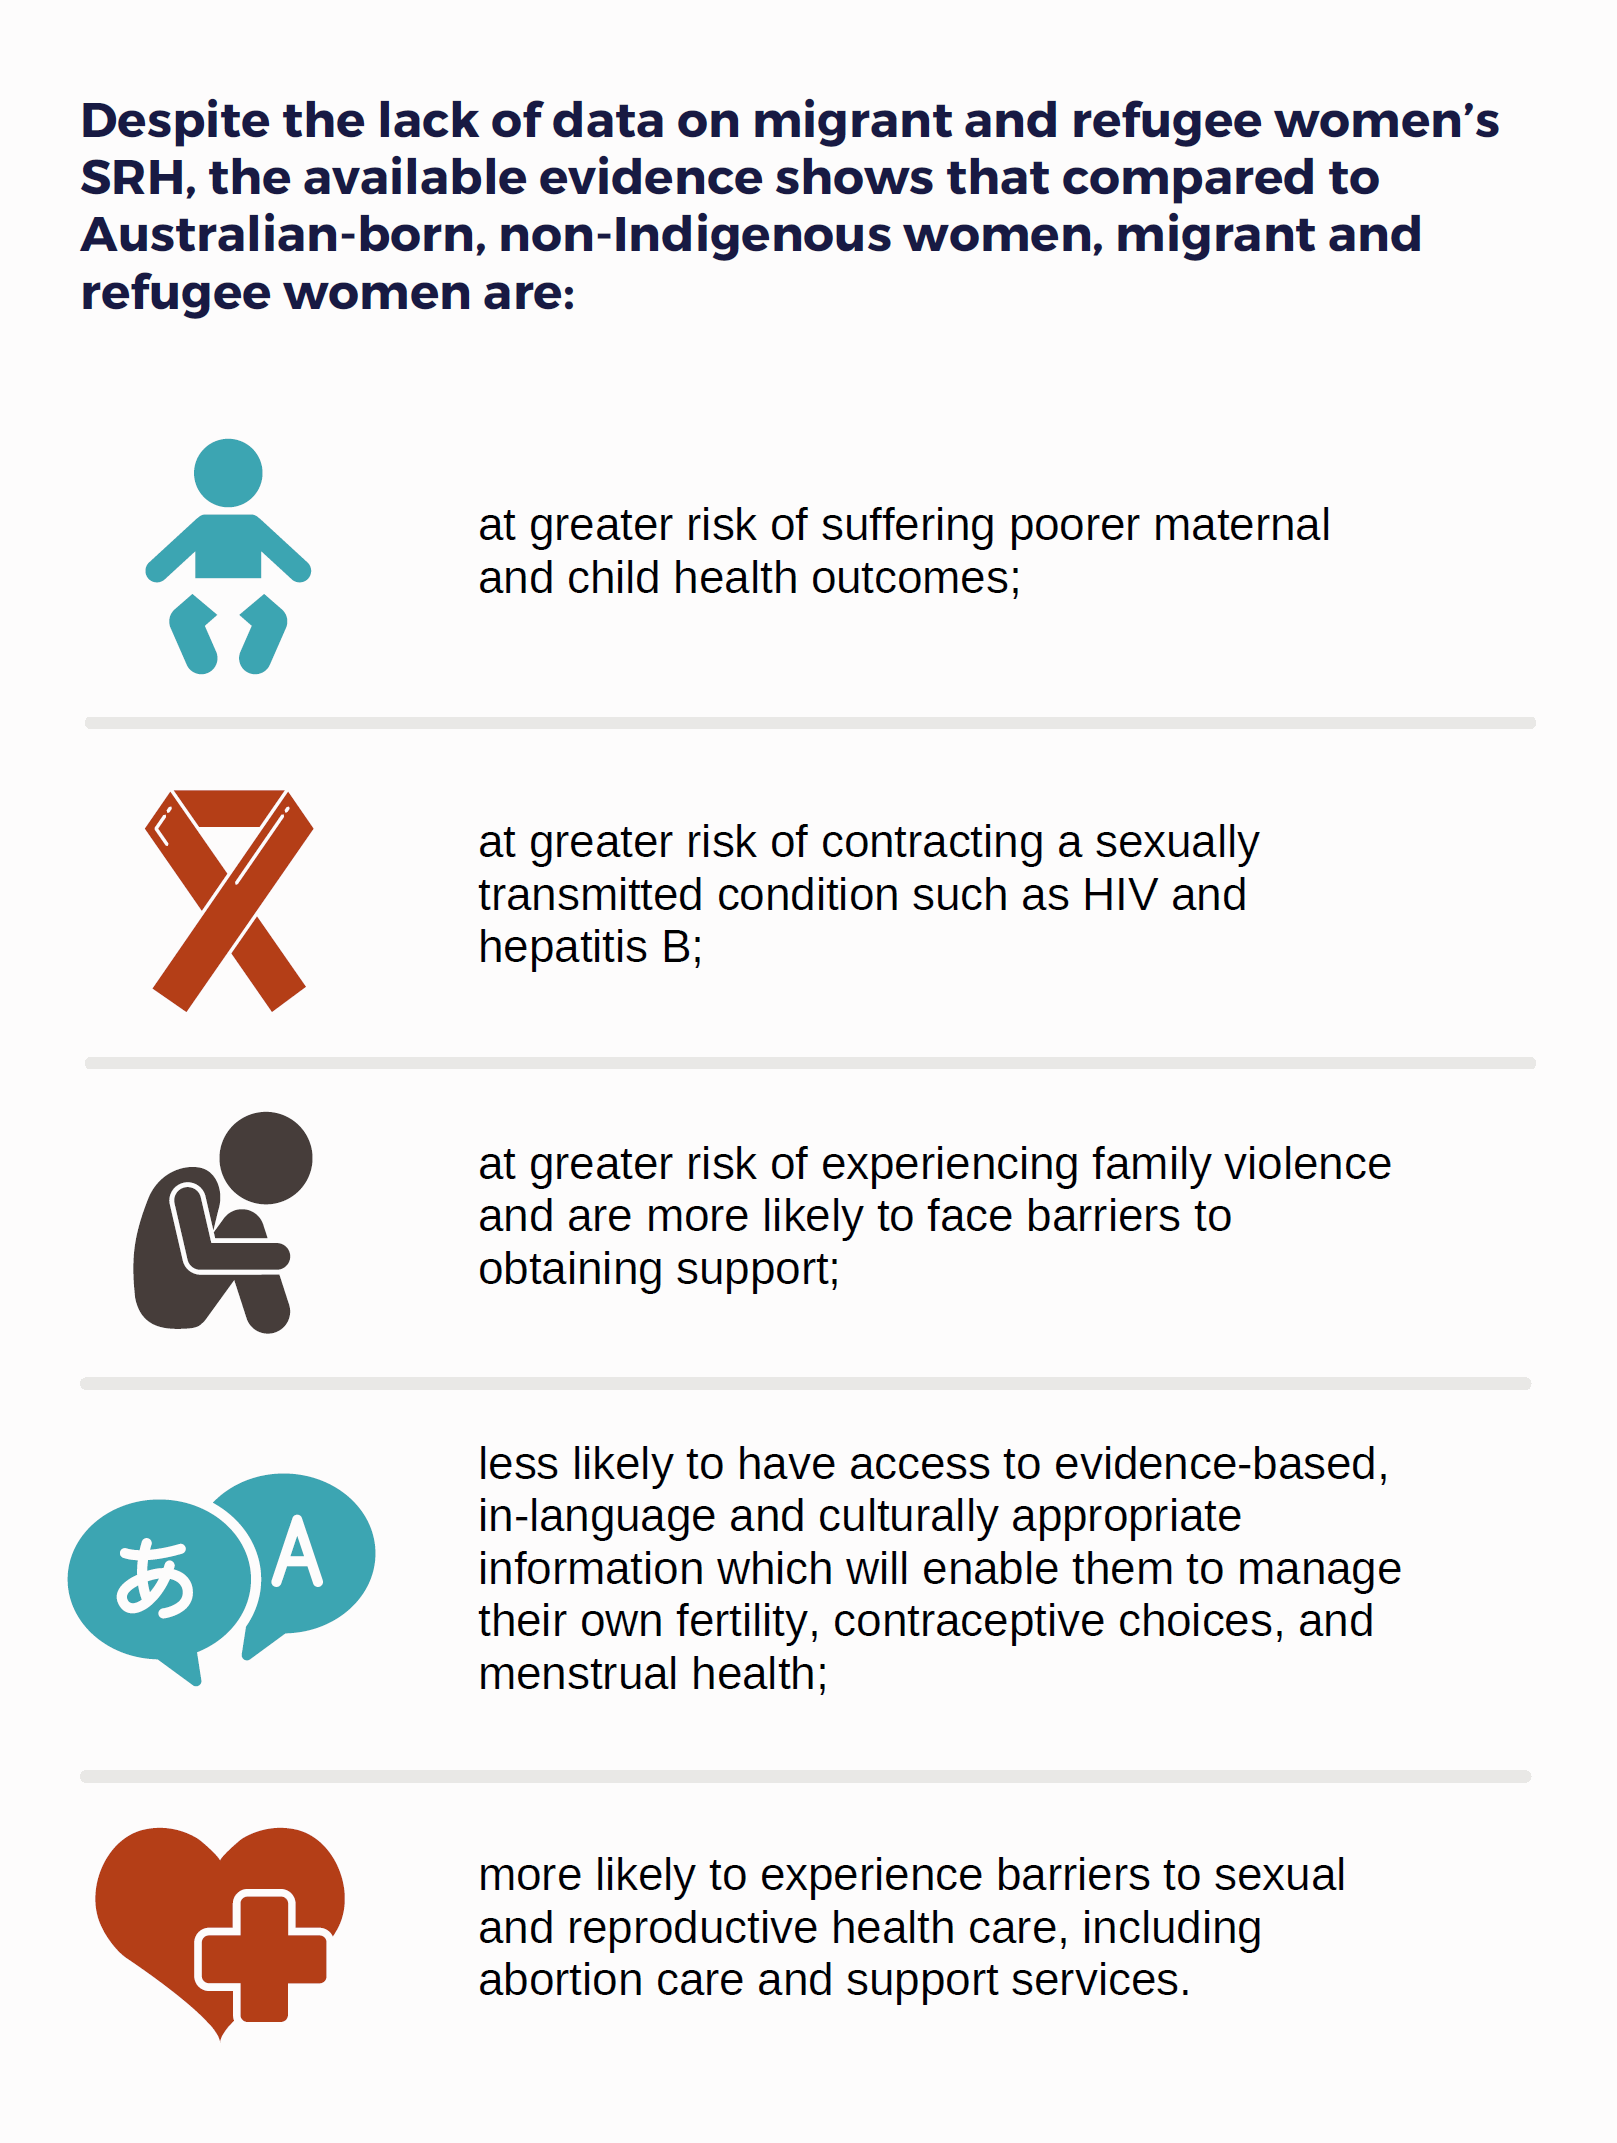 An image of page 2 of the report, which explains that Despite the lack of data on migrant and refugee women’s SRH, the available evidence shows that compared to Australian-born, non-Indigenous women, migrant and refugee women are: at greater risk of suffering poorer maternal and child health outcomes; at greater risk of contracting a sexually transmitted condition such as HIV and hepatitis B; at greater risk of experiencing family violence and are more likely to face barriers to obtaining support; less likely to have access to evidence-based, in-language and culturally appropriate information which will enable them to manage their own fertility, contraceptive choices, and menstrual health; more likely to experience barriers to sexual and reproductive health care, including abortion care and support services.